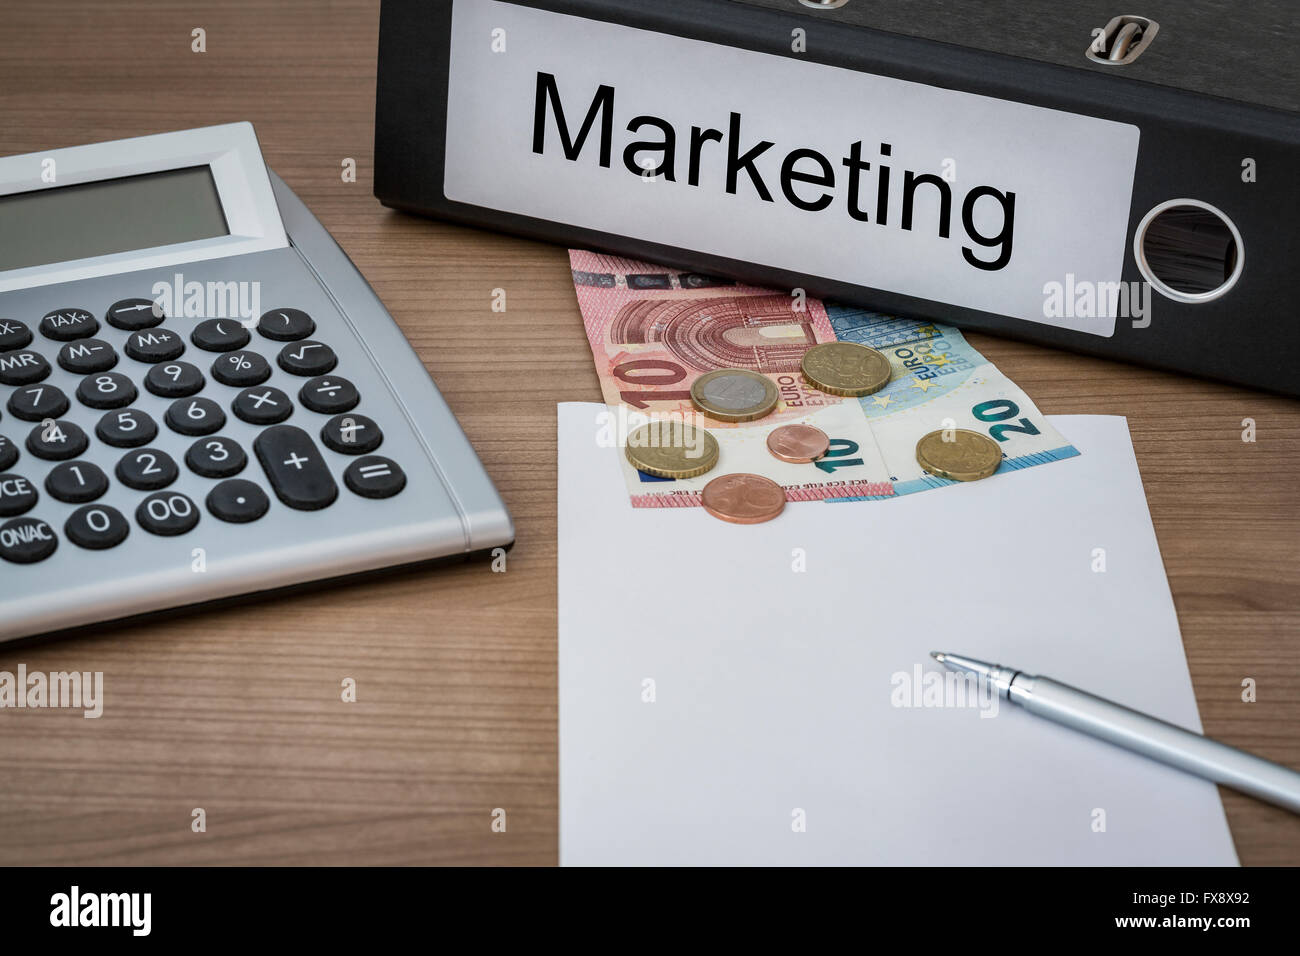 Marketing written on a binder on a desk with euro money calculator blank sheet and pen Stock Photo